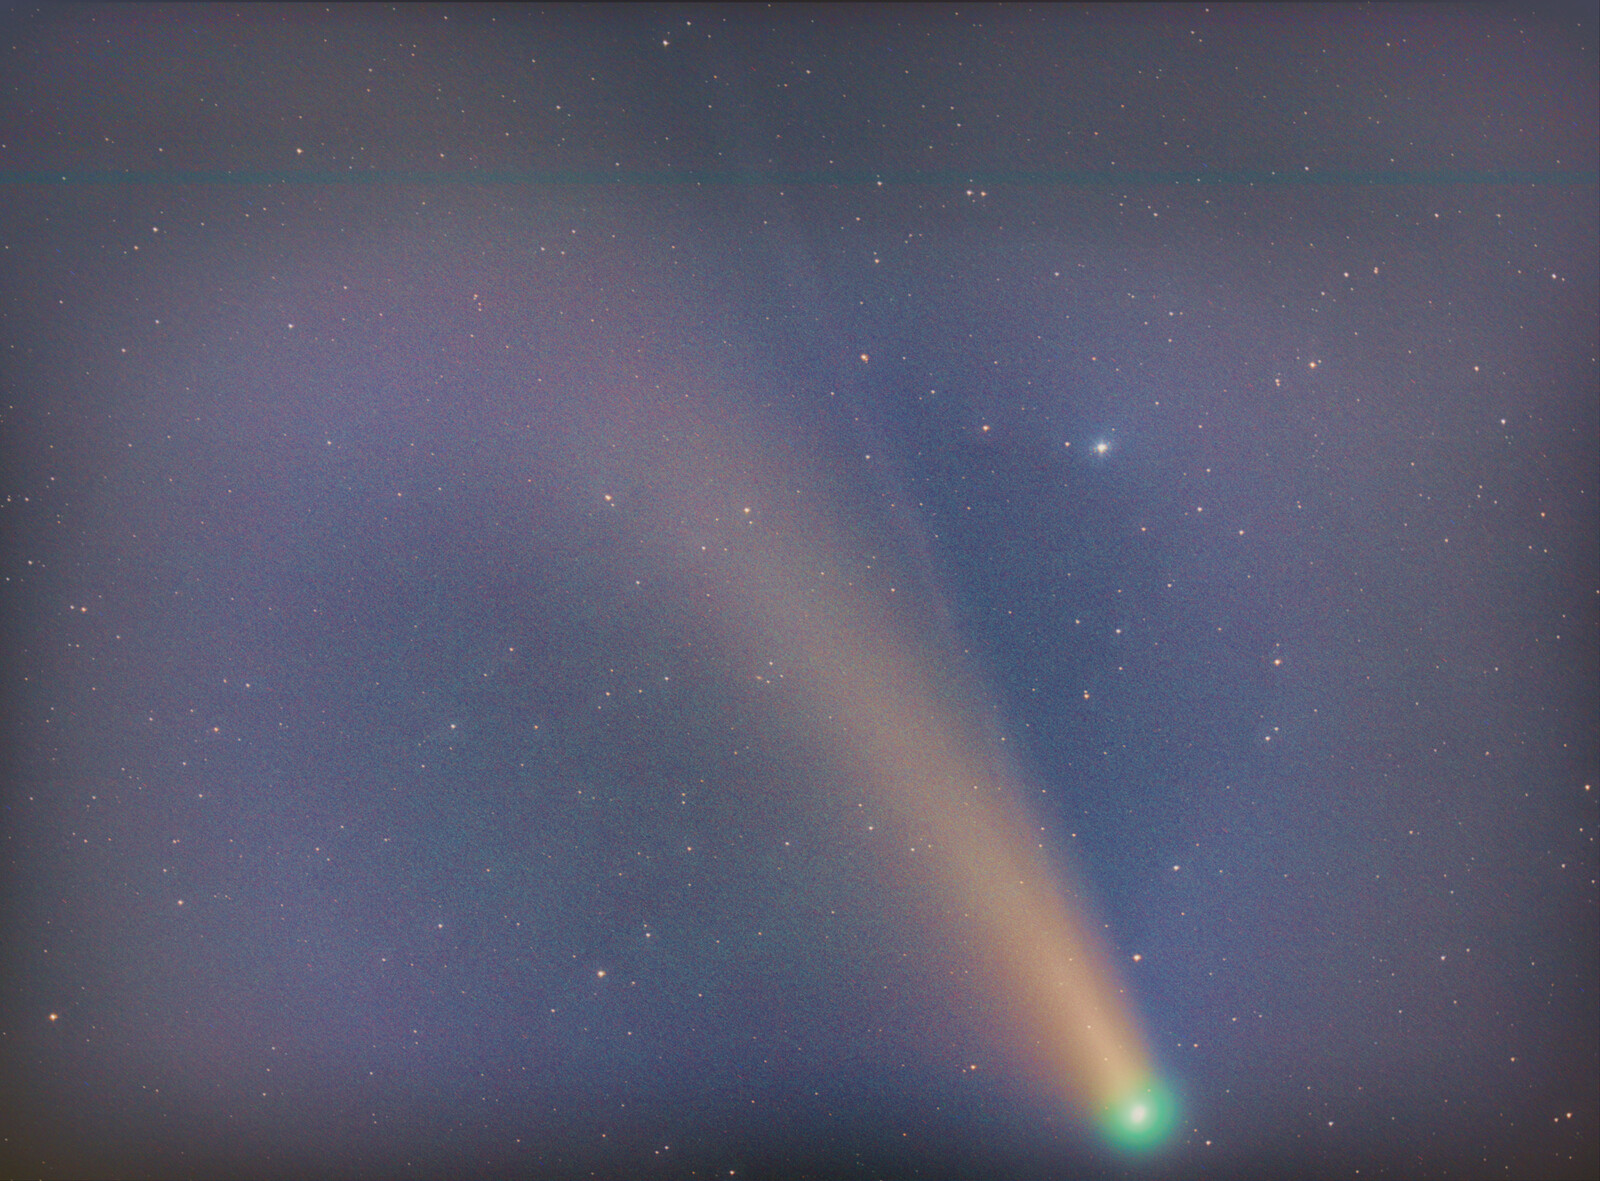 Comet NeoWise 2020#2 1 16bit editted flatter